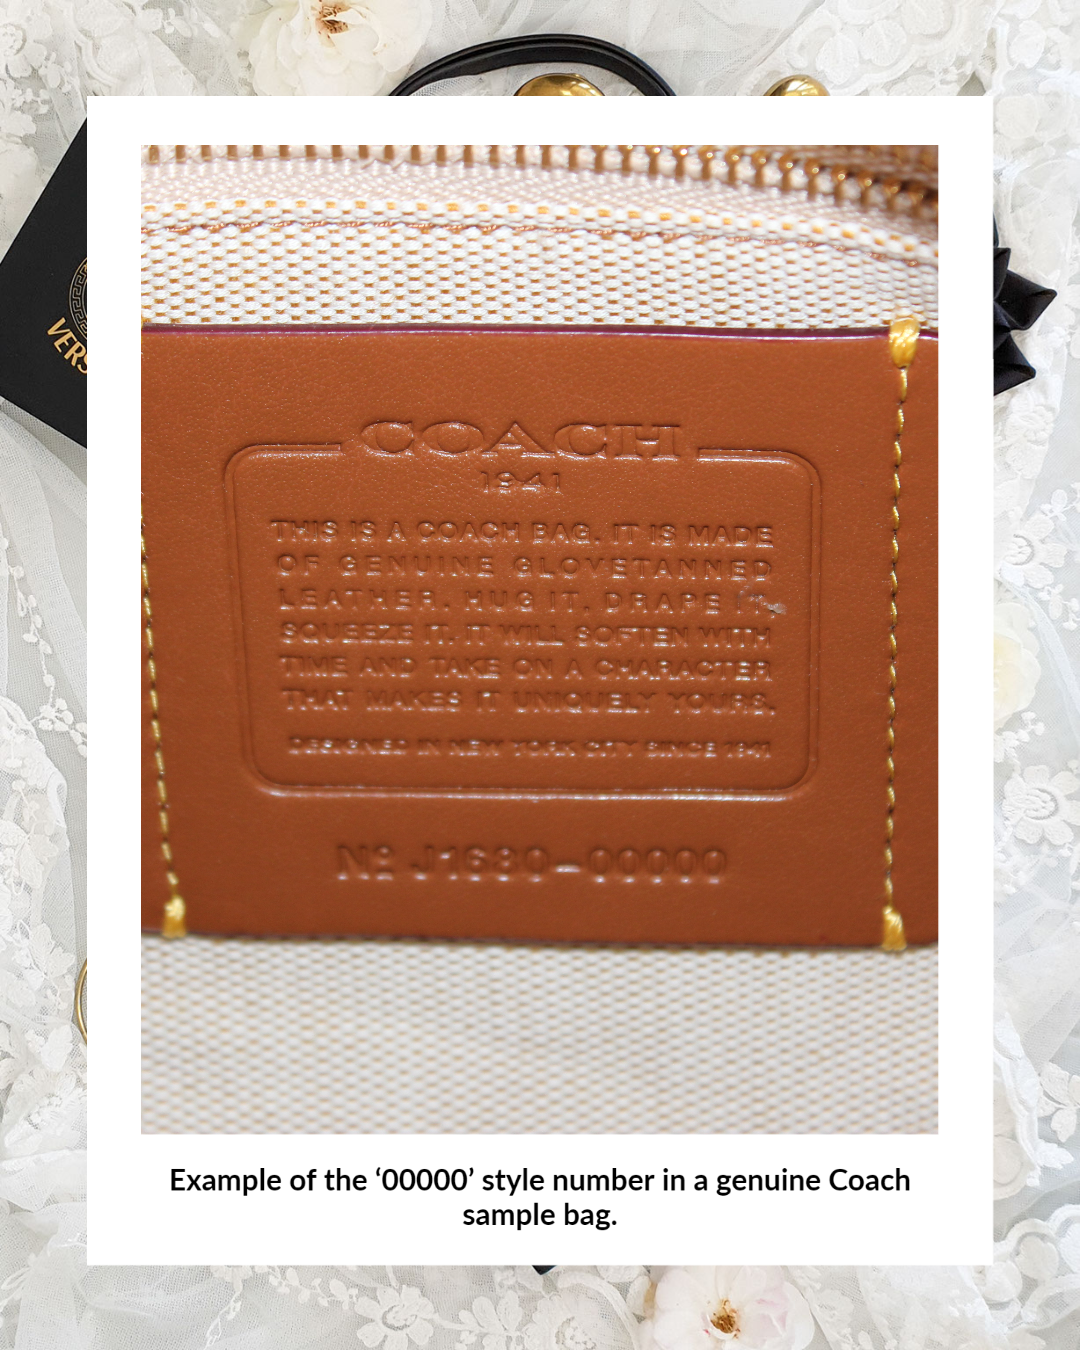 Coach sample bag style number 00000 authentic serial number guide